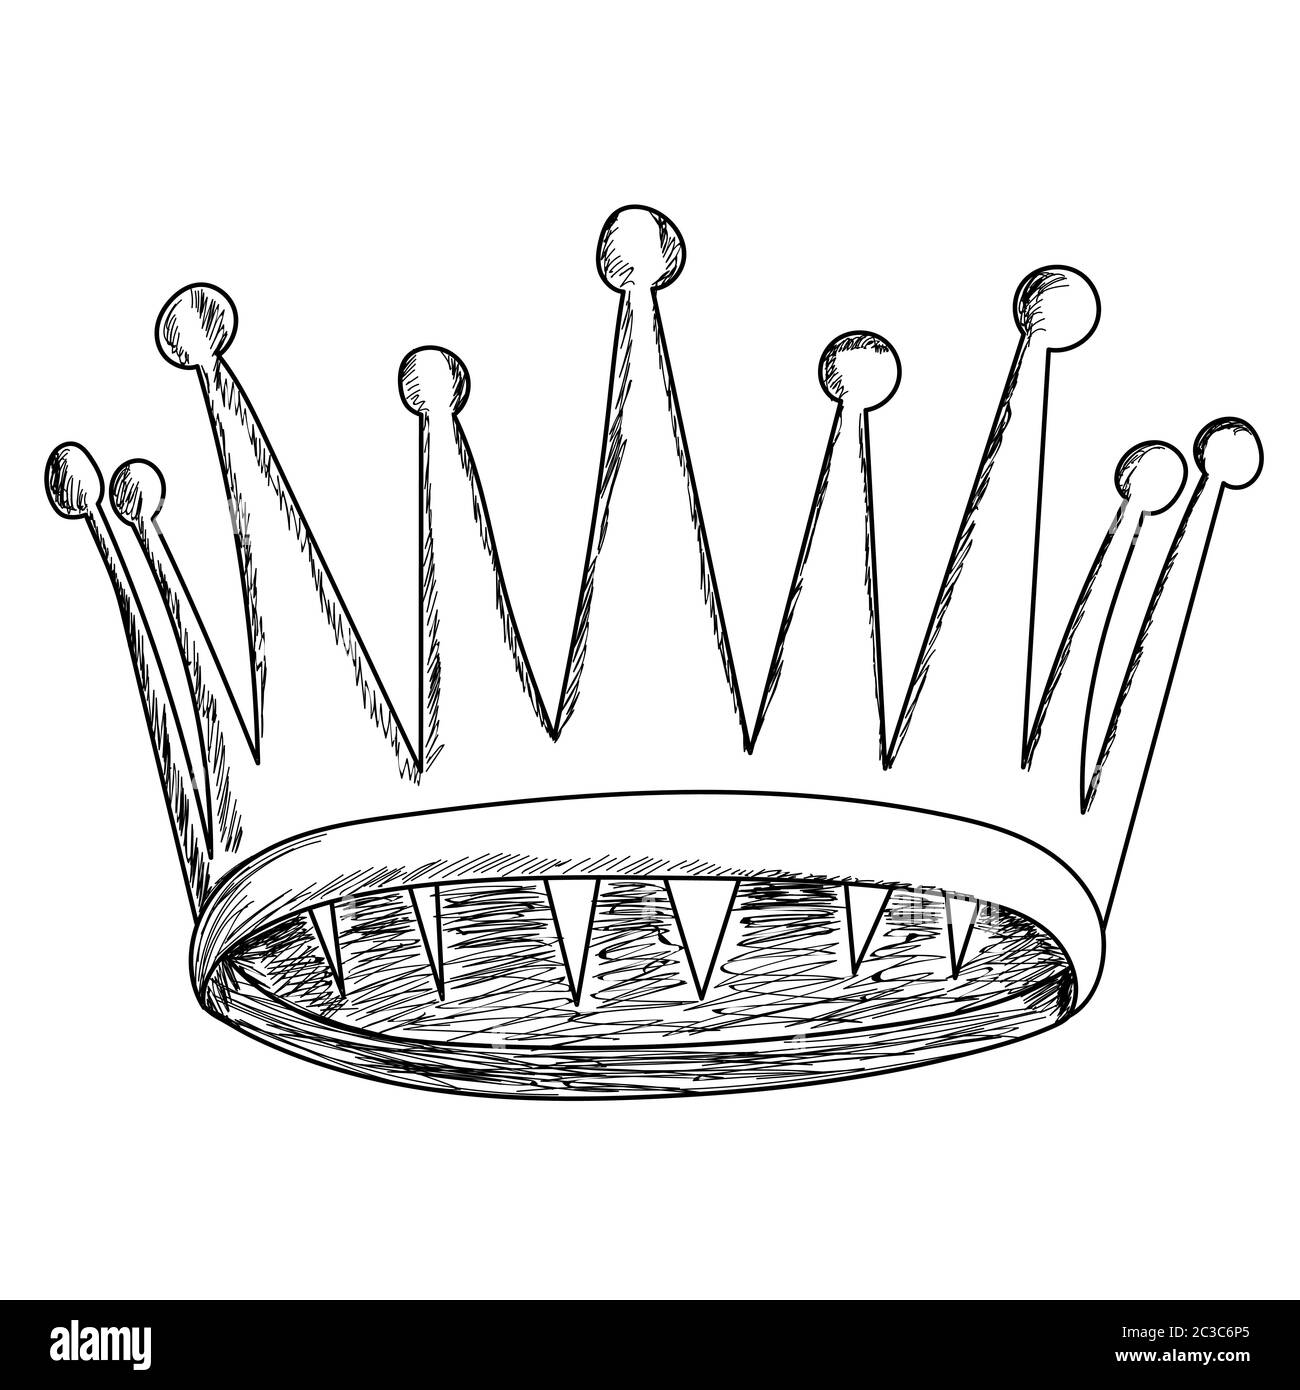 How to Draw a Crown  Drawing Cartoon Crowns  Easy Step by Step Drawing  Tutorial for Kids  How to Draw Step by Step Drawing Tutorials